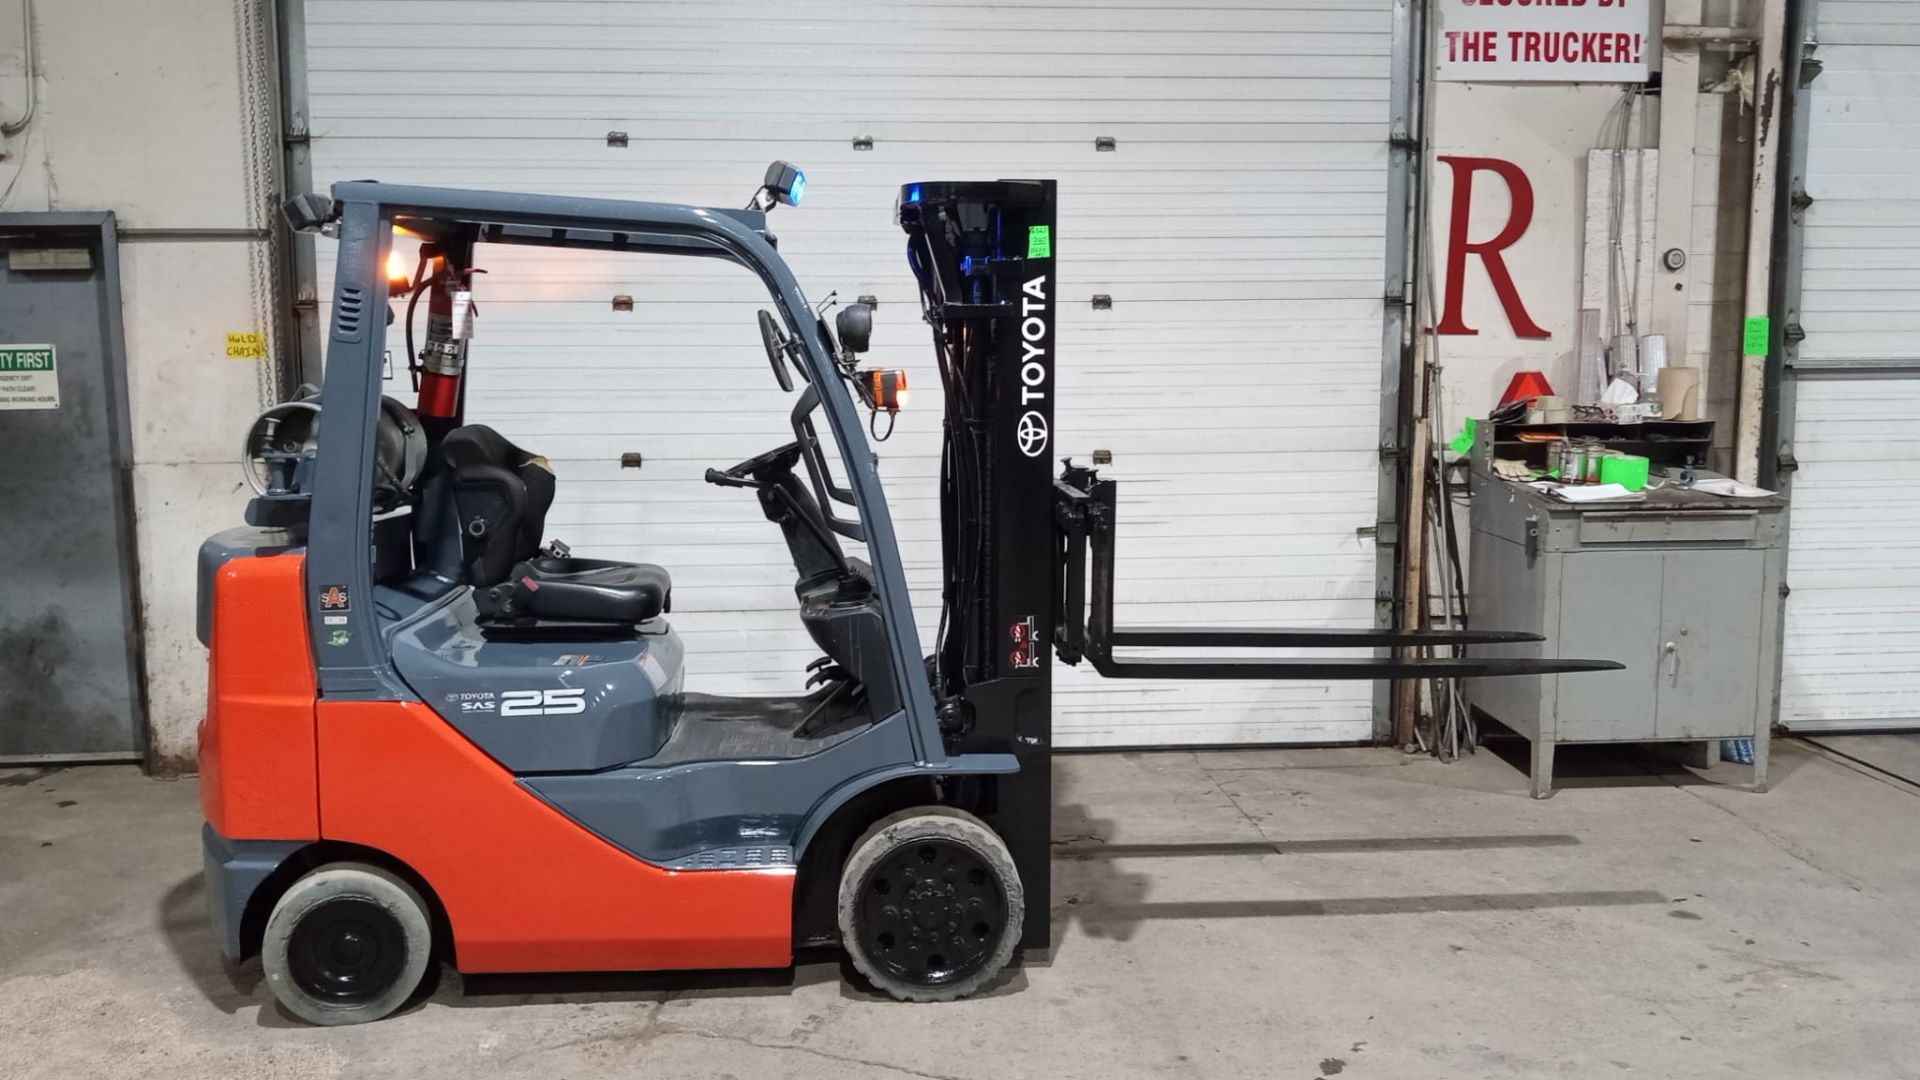 2007 TOYOTA 5,000lbs Capacity LPG (Propane) Forklift with sideshift and 3-STAGE MAST & Non Marking